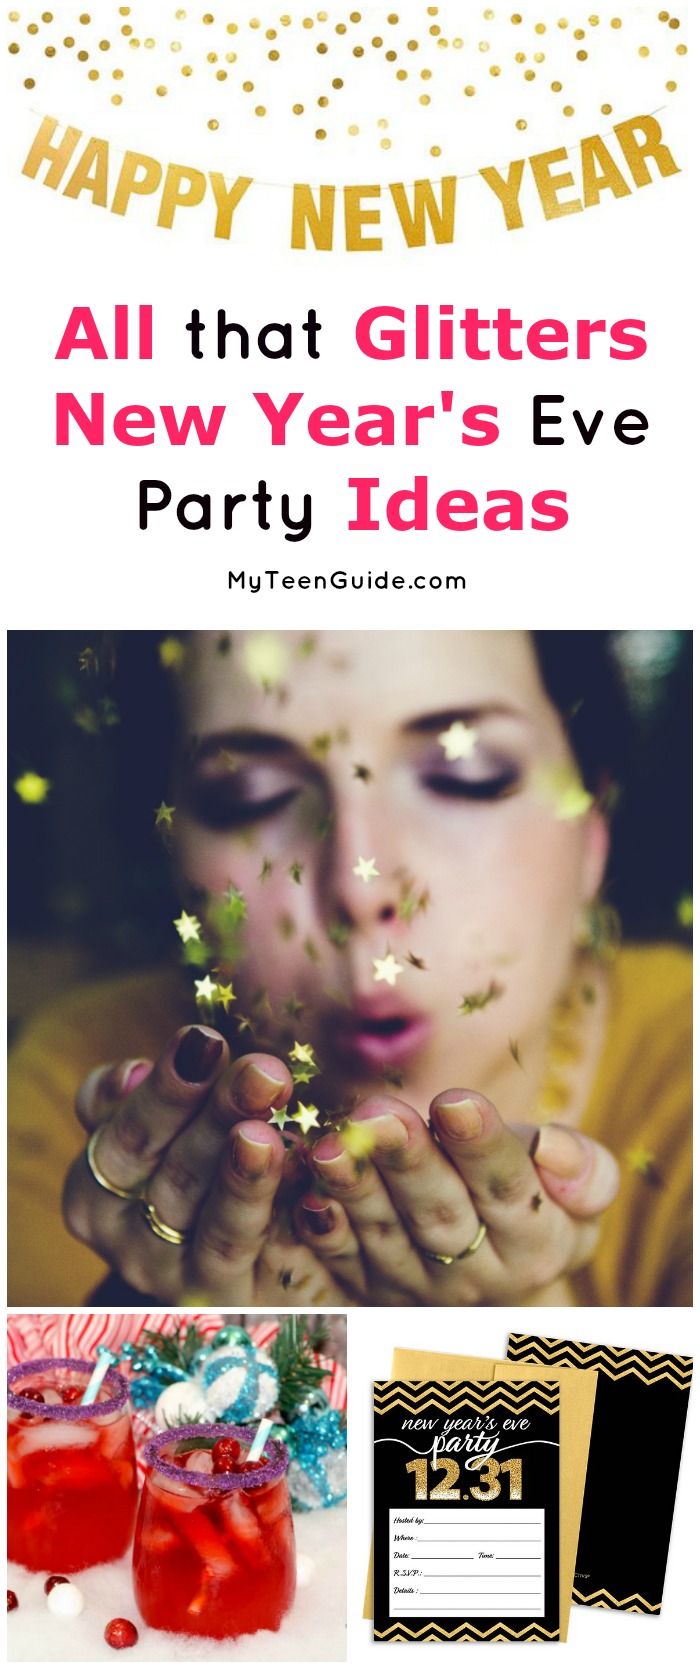 Ring in the New Year with glitz and glam with these "All that Glitters" New Year's Eve party ideas! We'll show you everything you need to have THE party of the year!